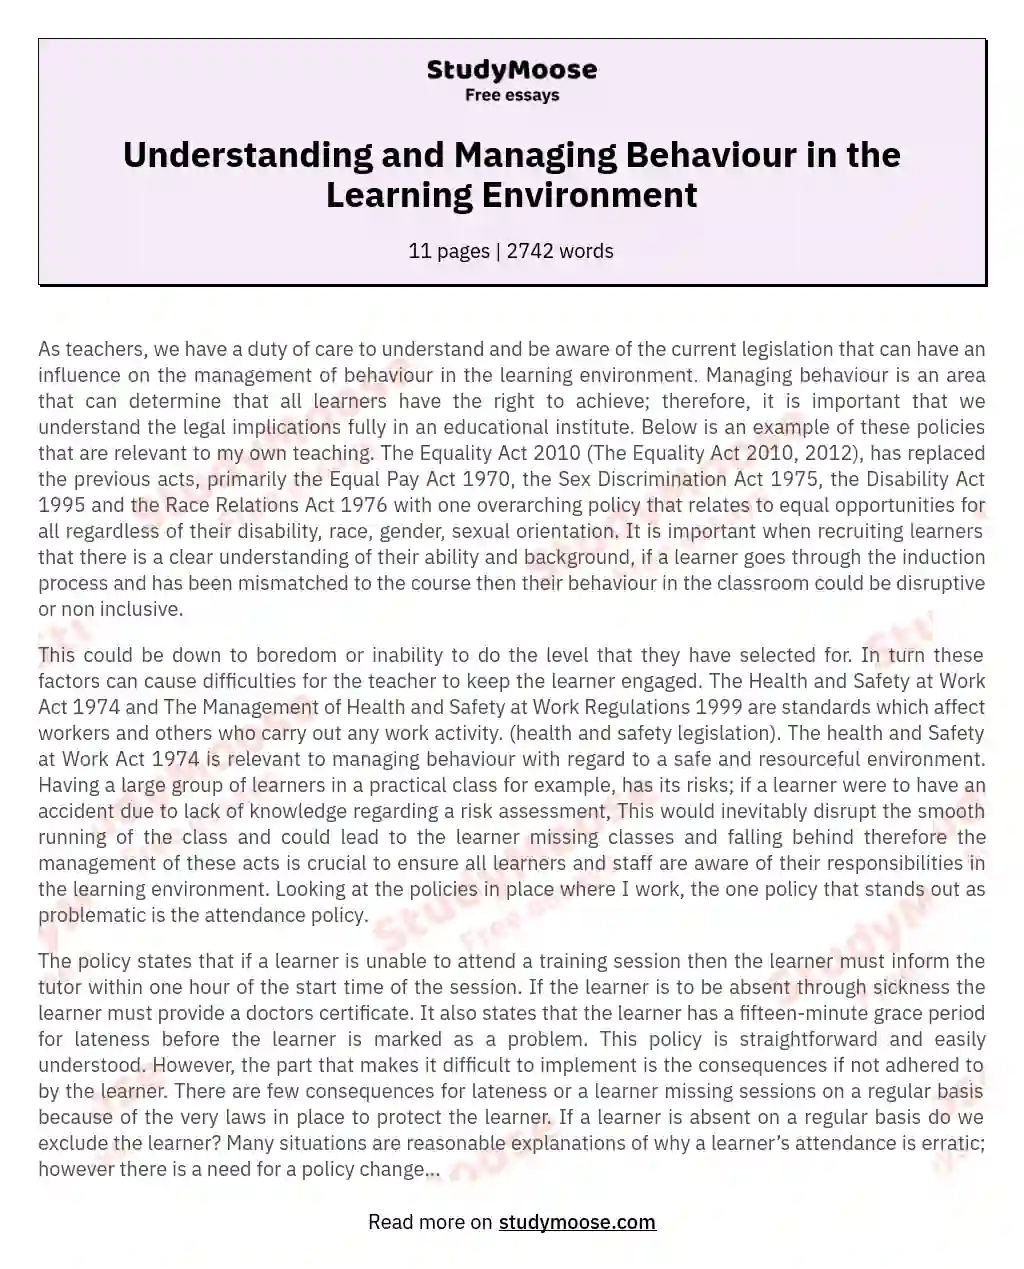 Understanding and Managing Behaviour in the Learning Environment essay